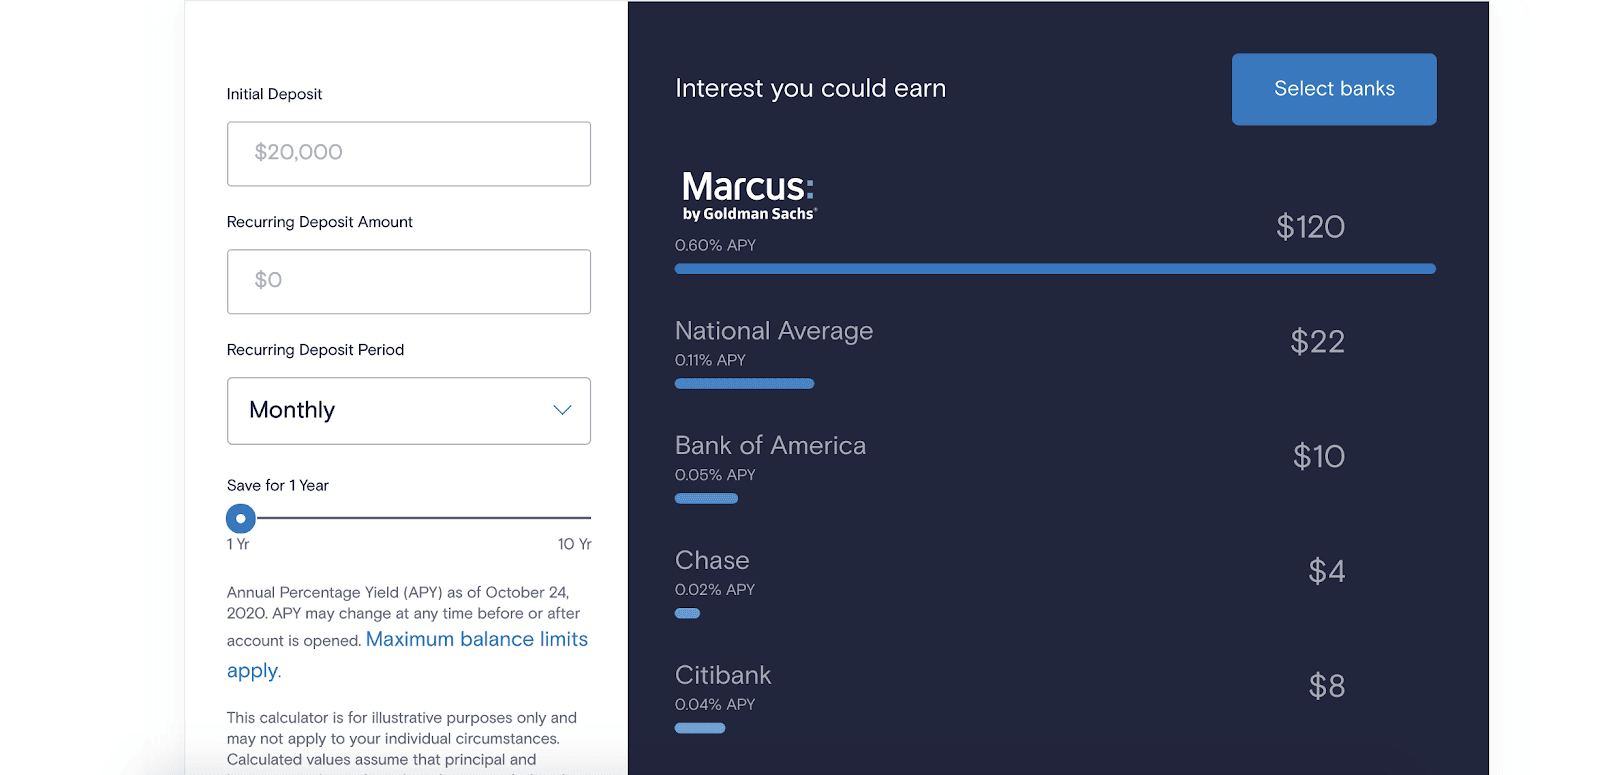 Marcus by Goldman Sachs Review: An All-in-One Tool for Managing Your Finances - CD calculator